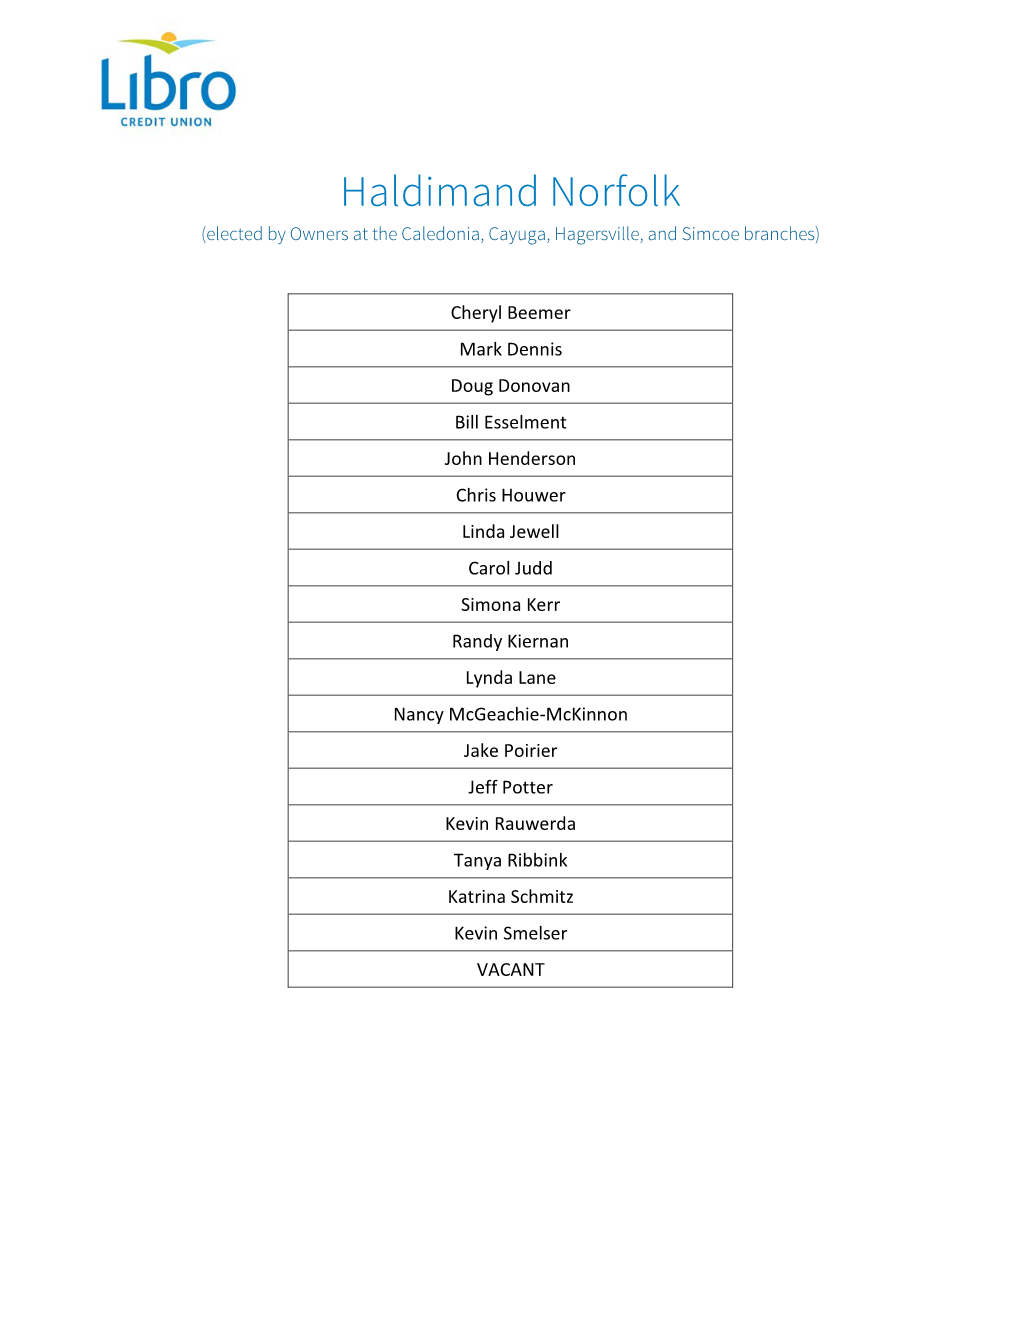 Haldimand Norfolk (Elected by Owners at the Caledonia, Cayuga, Hagersville, and Simcoe Branches)